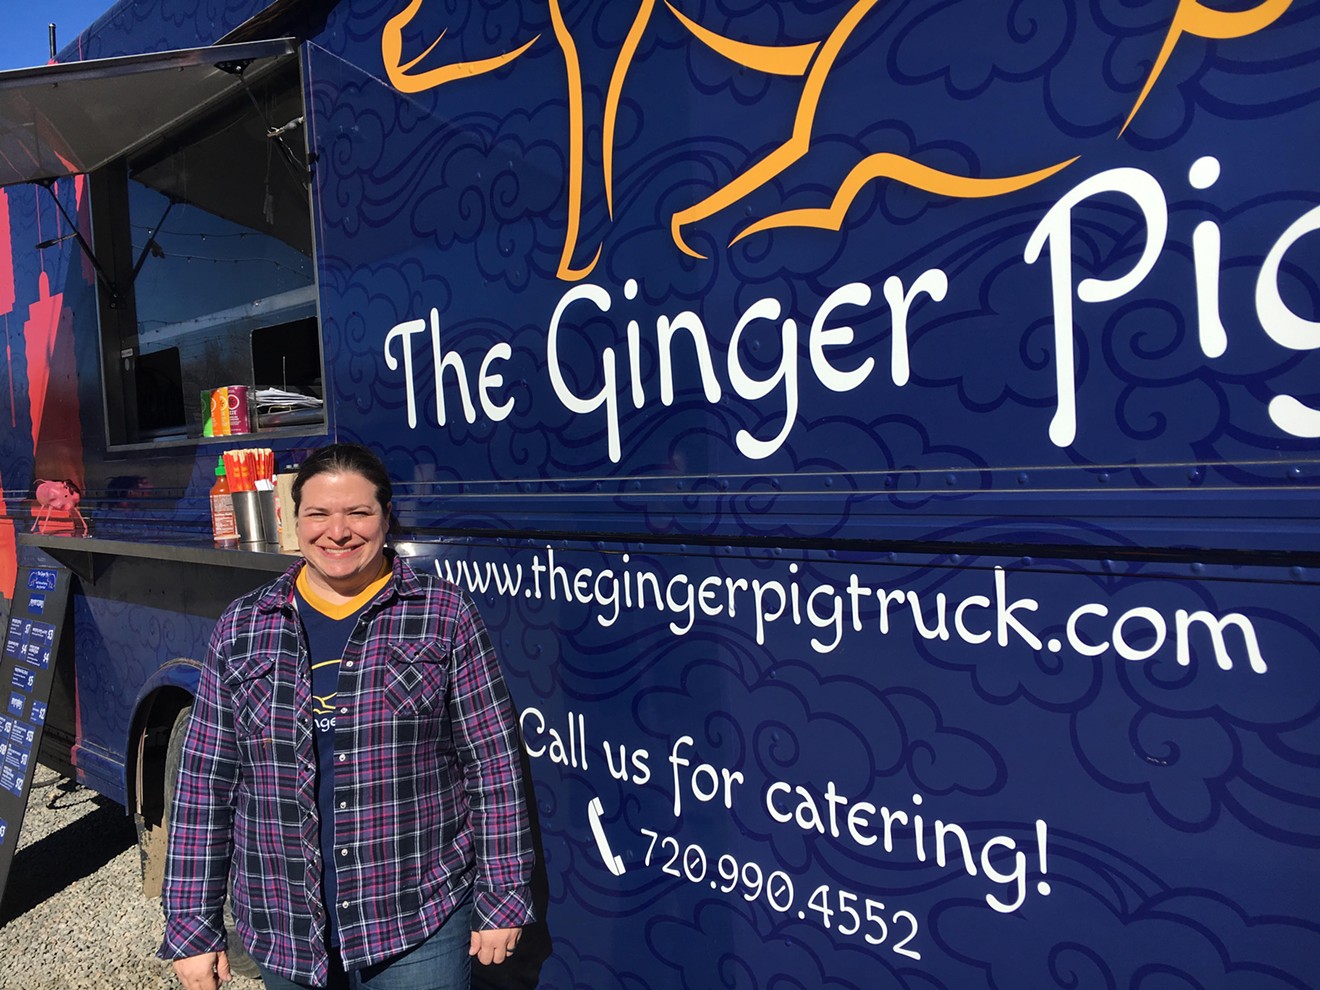 Natascha Hess has been a hockey player and a lawyer. Now she owns a food truck.